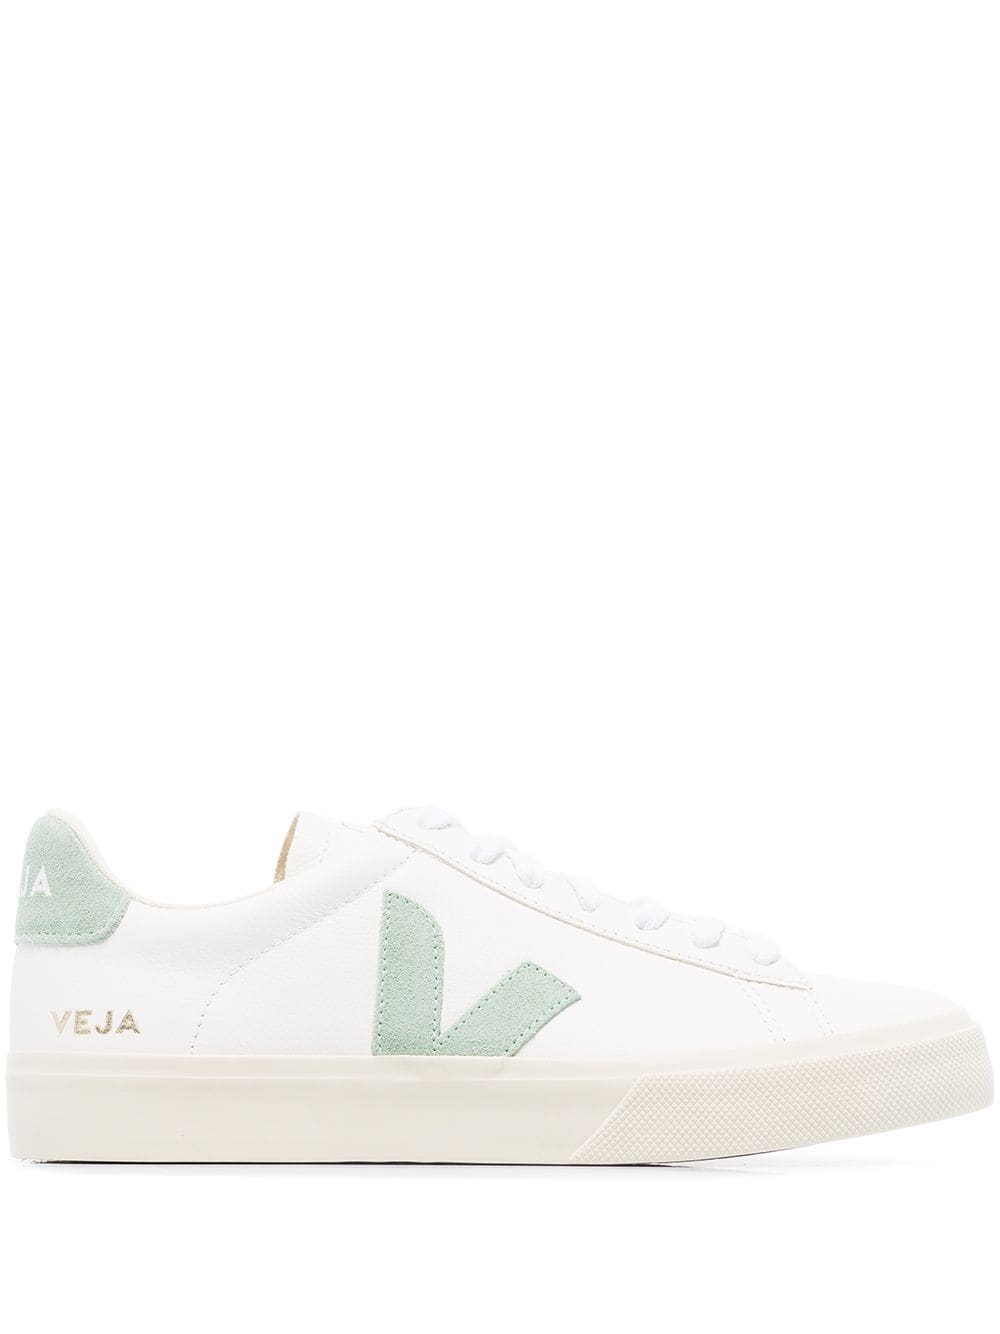 VEJA Campo low-top Sneakers - Farfetch